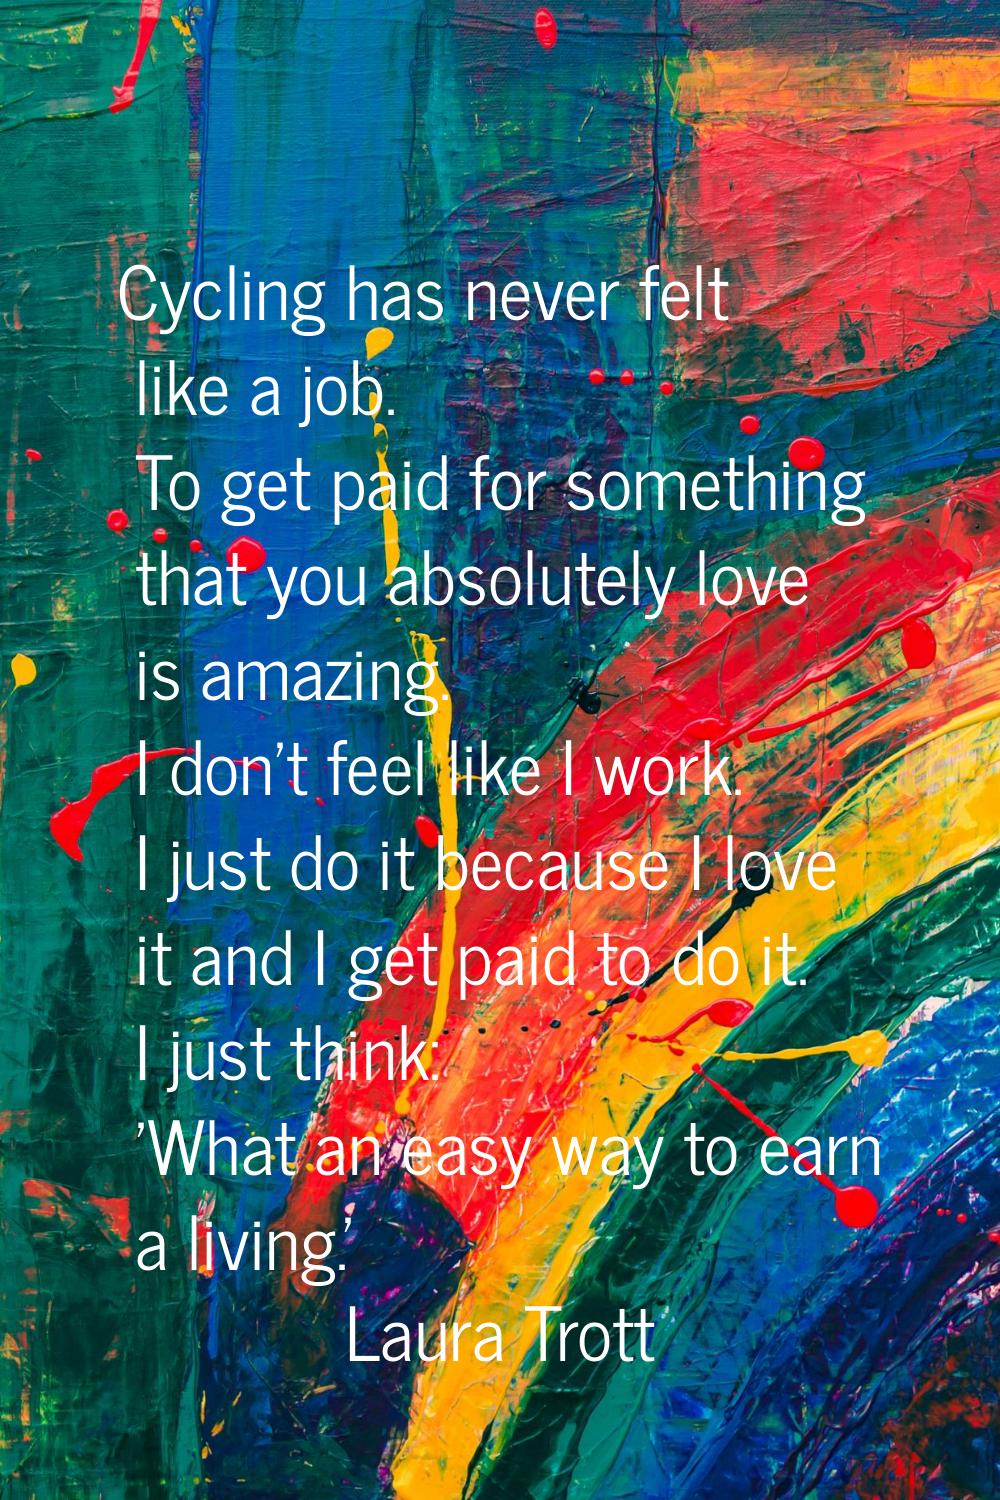 Cycling has never felt like a job. To get paid for something that you absolutely love is amazing. I